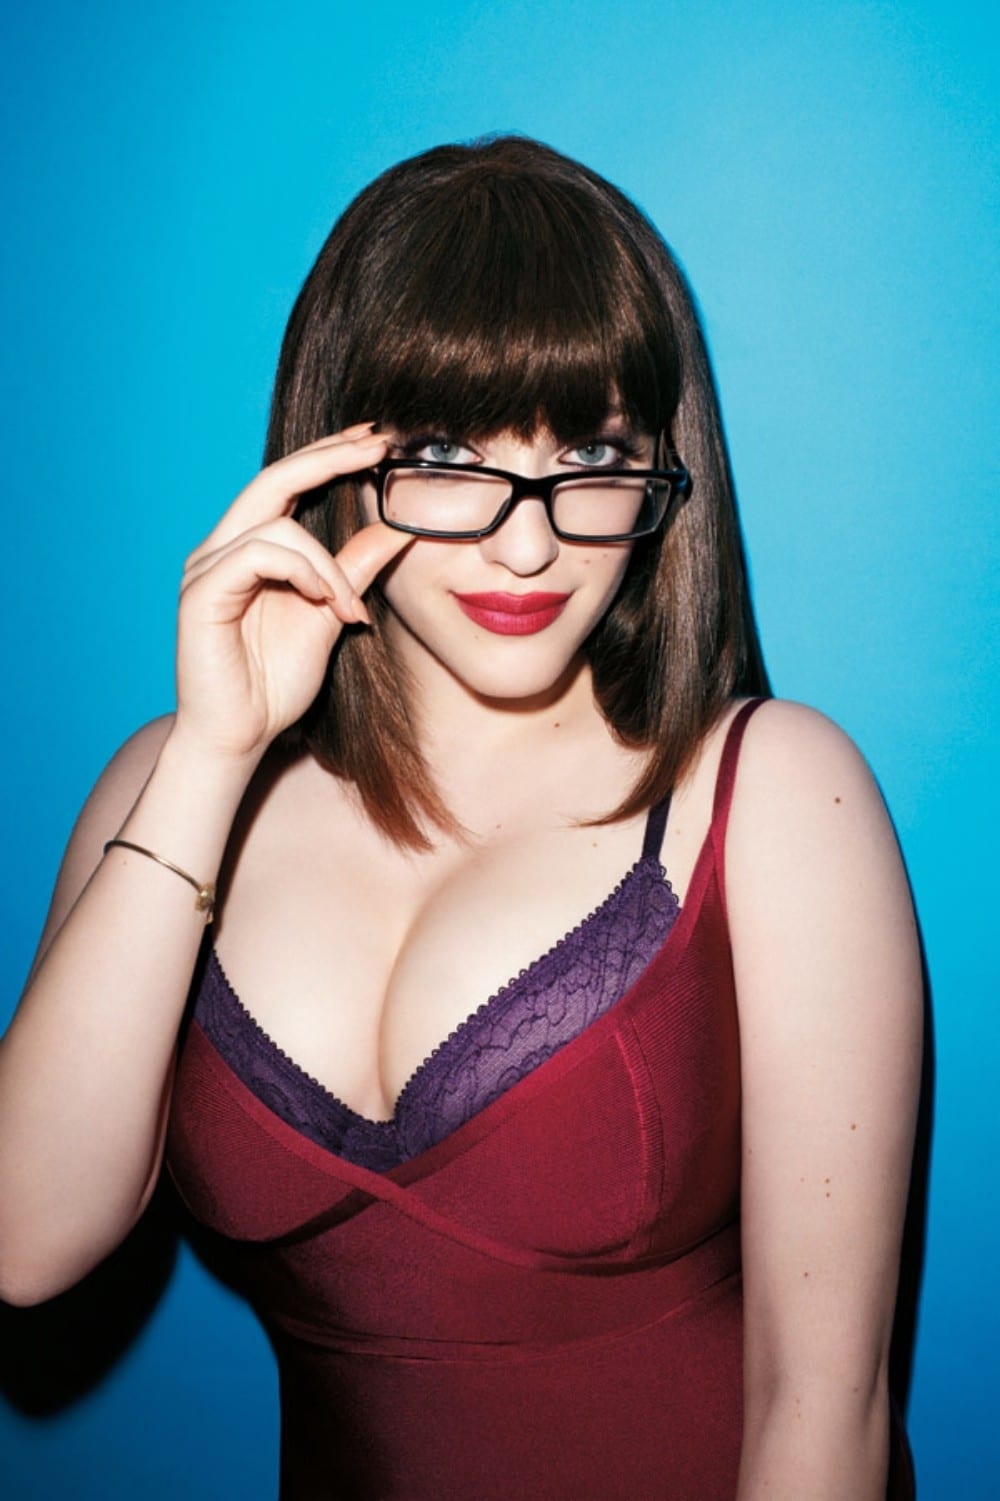 Kat dennings leaked nude pictures